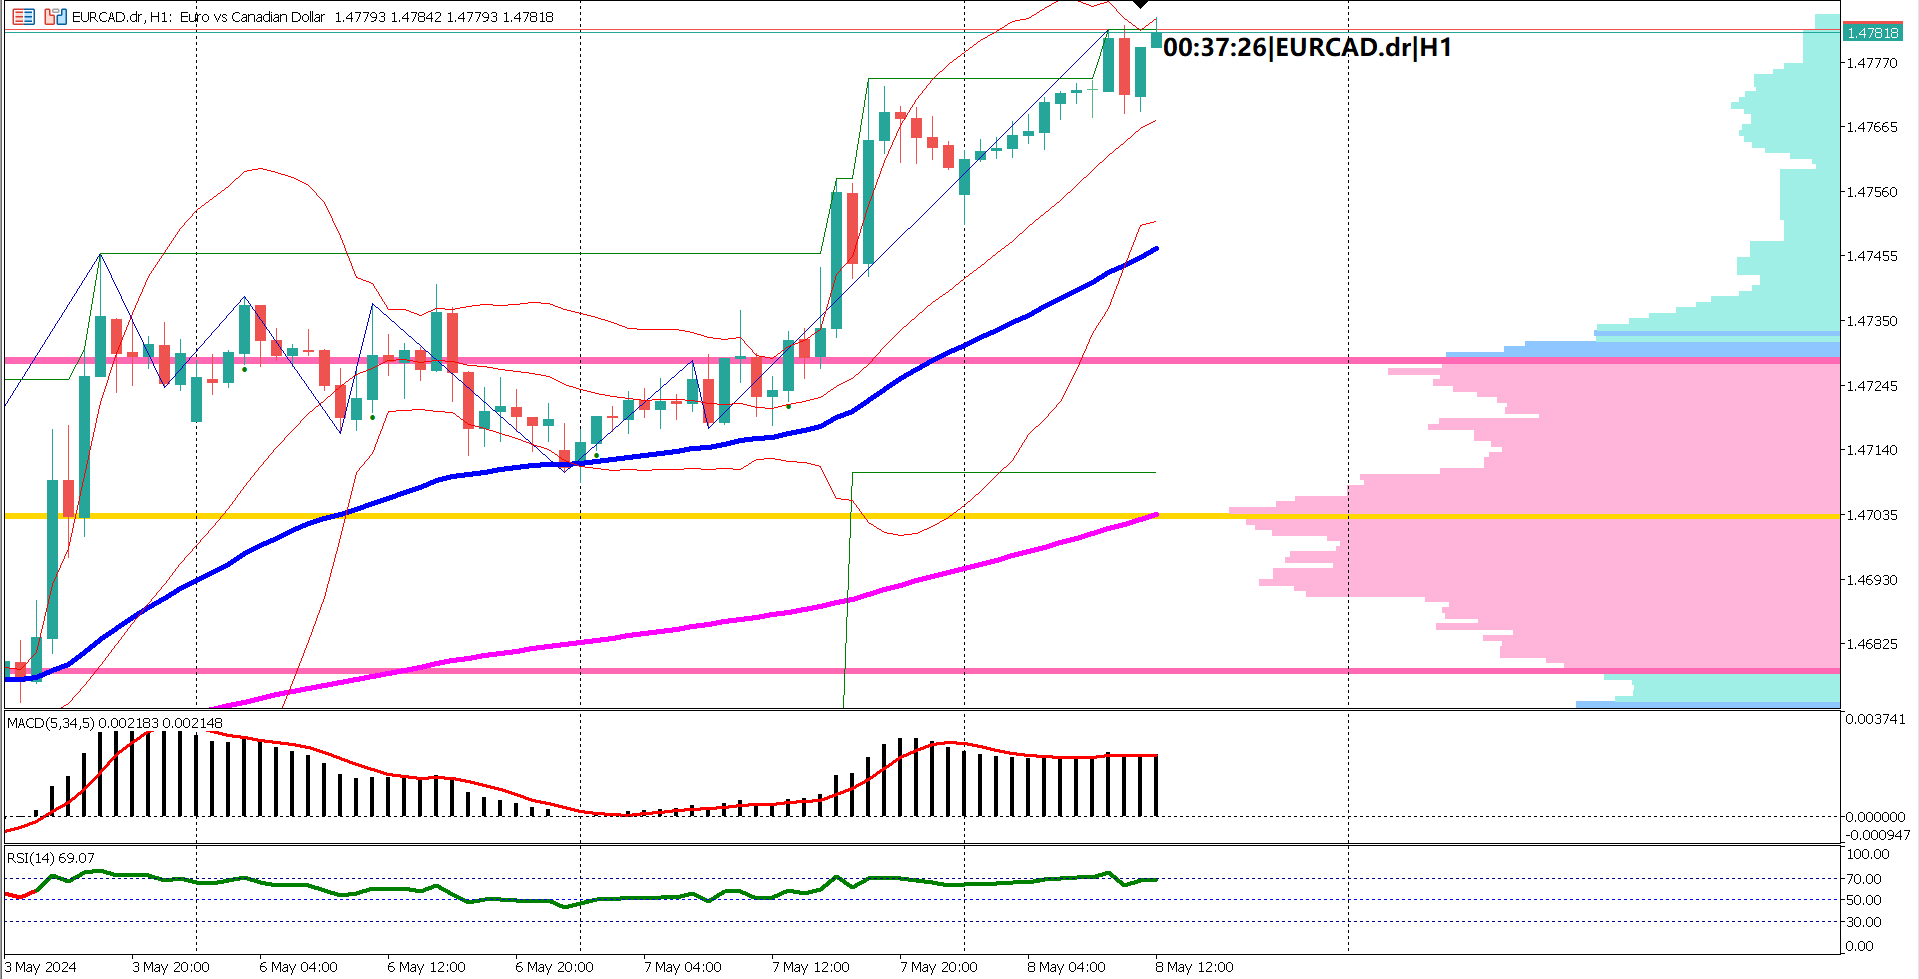 EURCAD Surges in Asian Trading, Volatility Contracts Amid Bullish Momentum